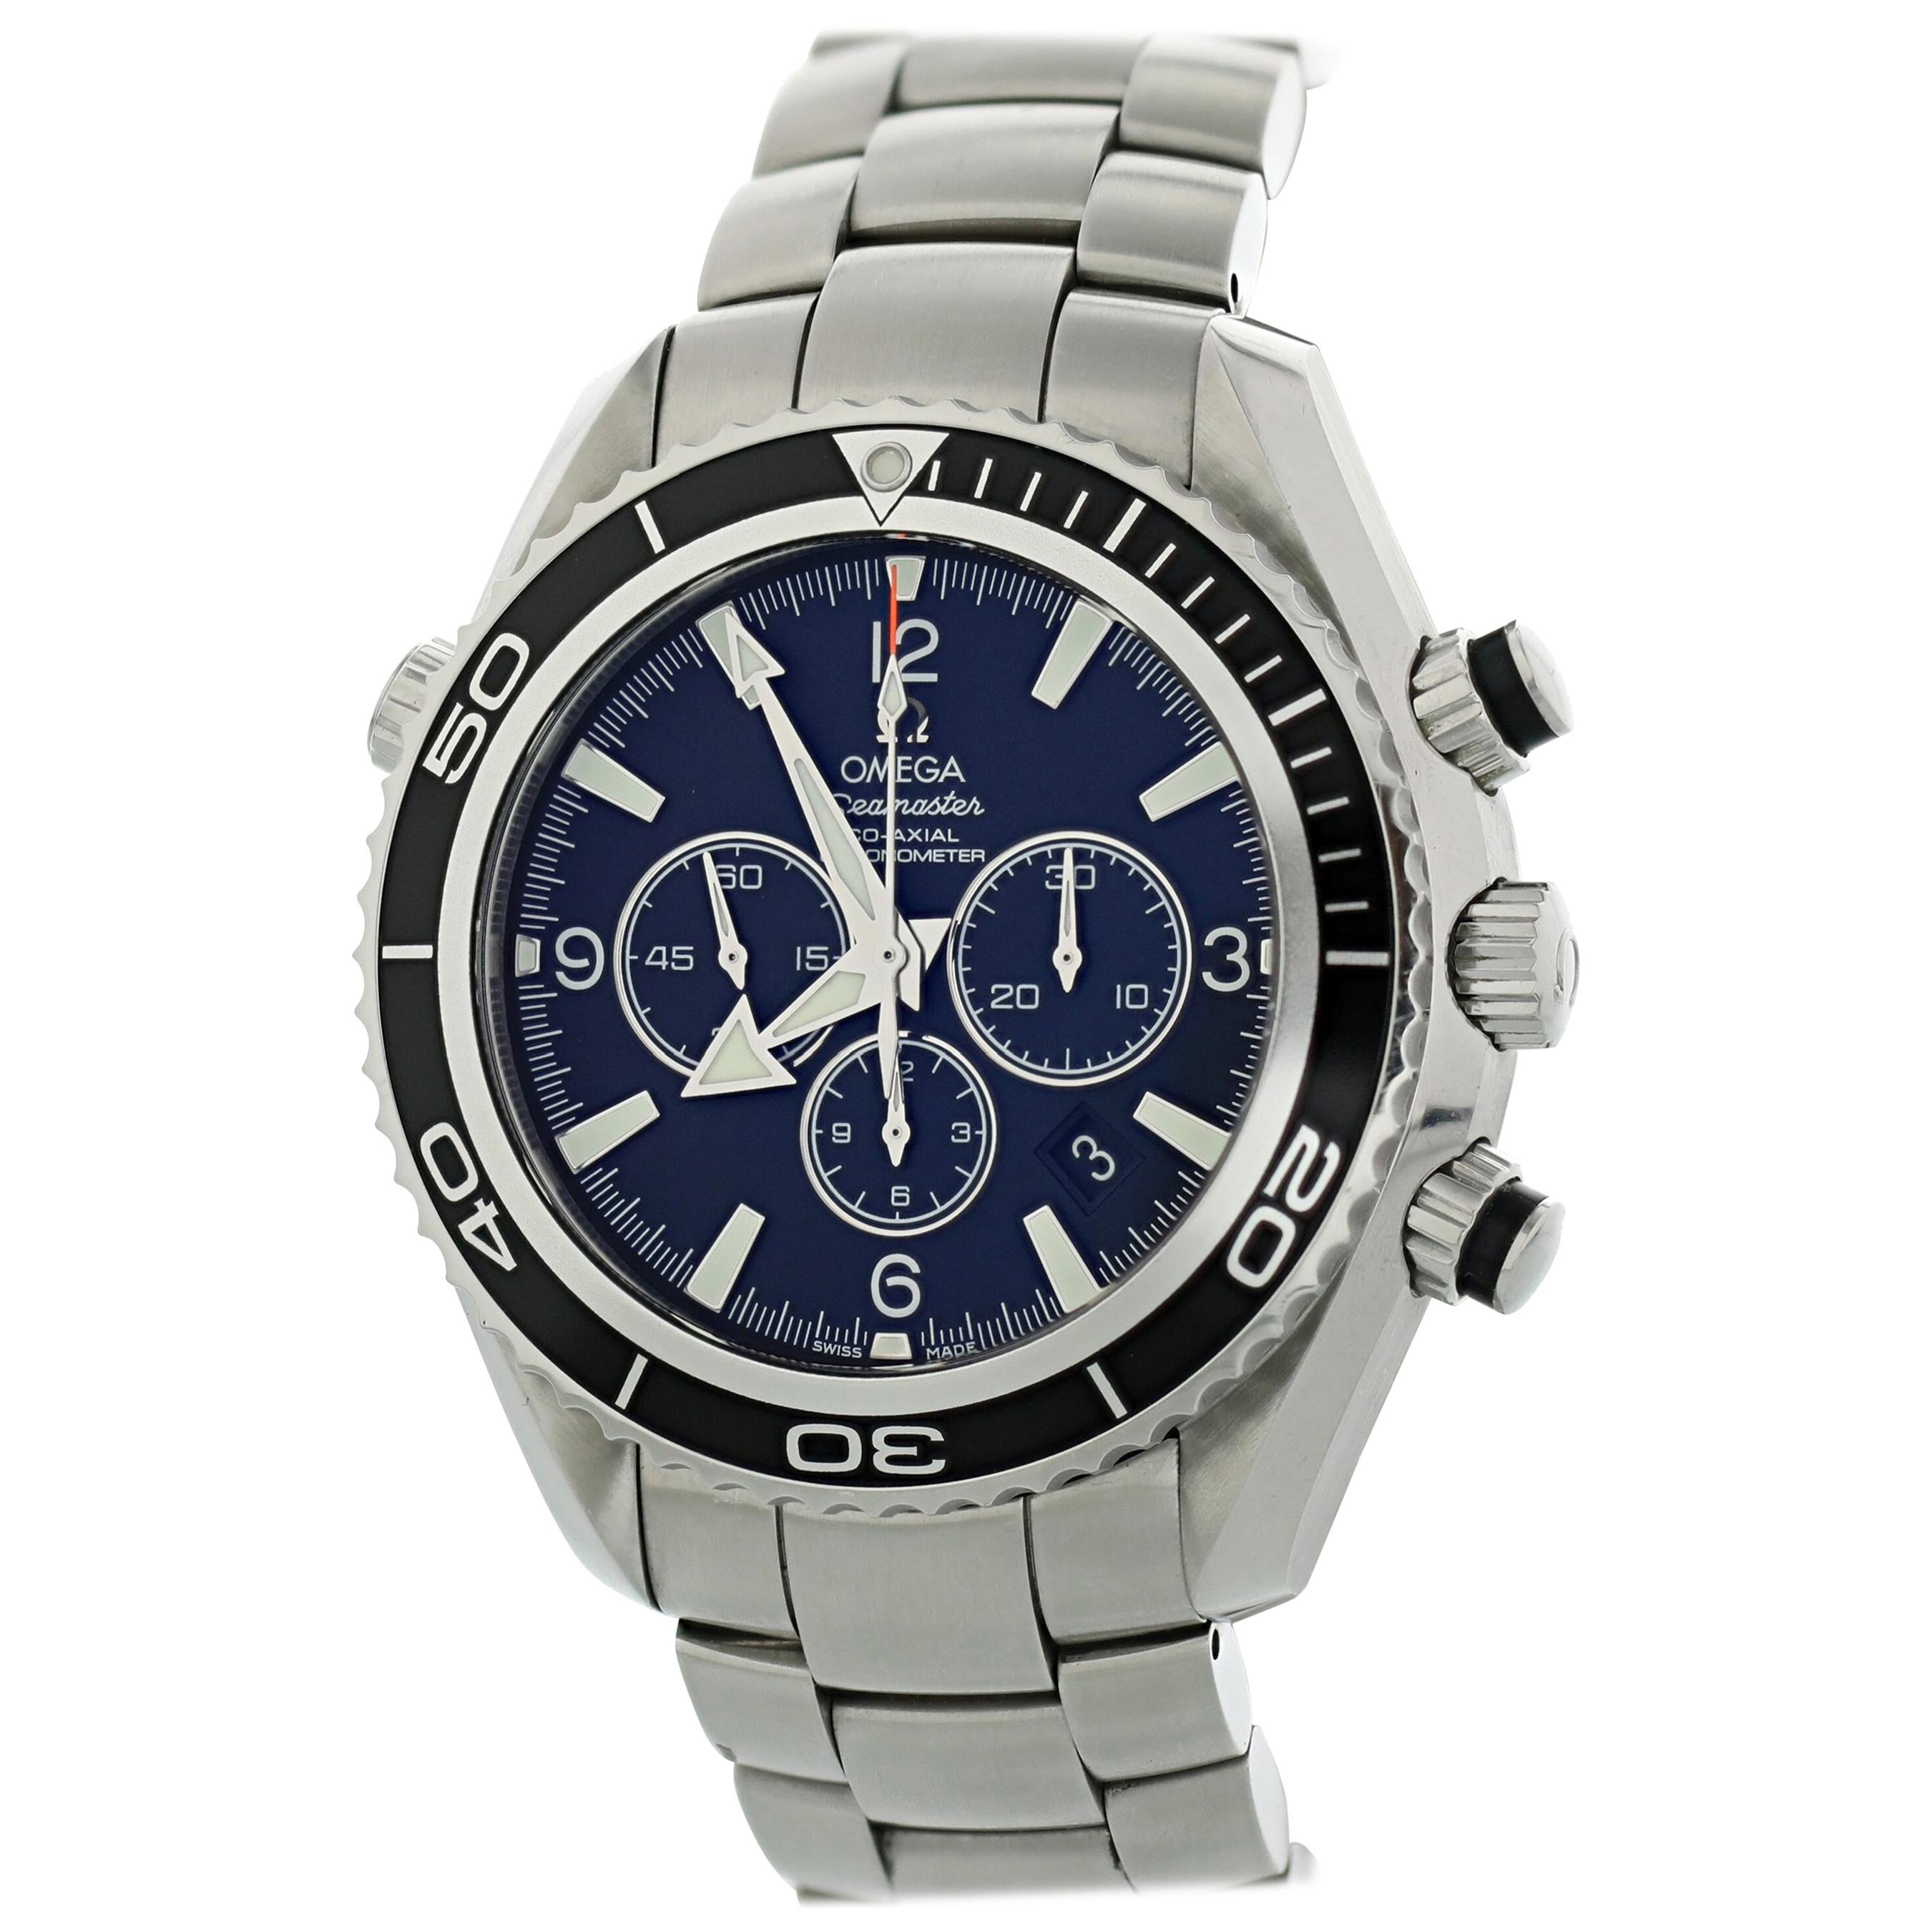 Omega Seamaster Planet Ocean 2210.50.00 600m Co-Axial Men’s Watch with Papers For Sale